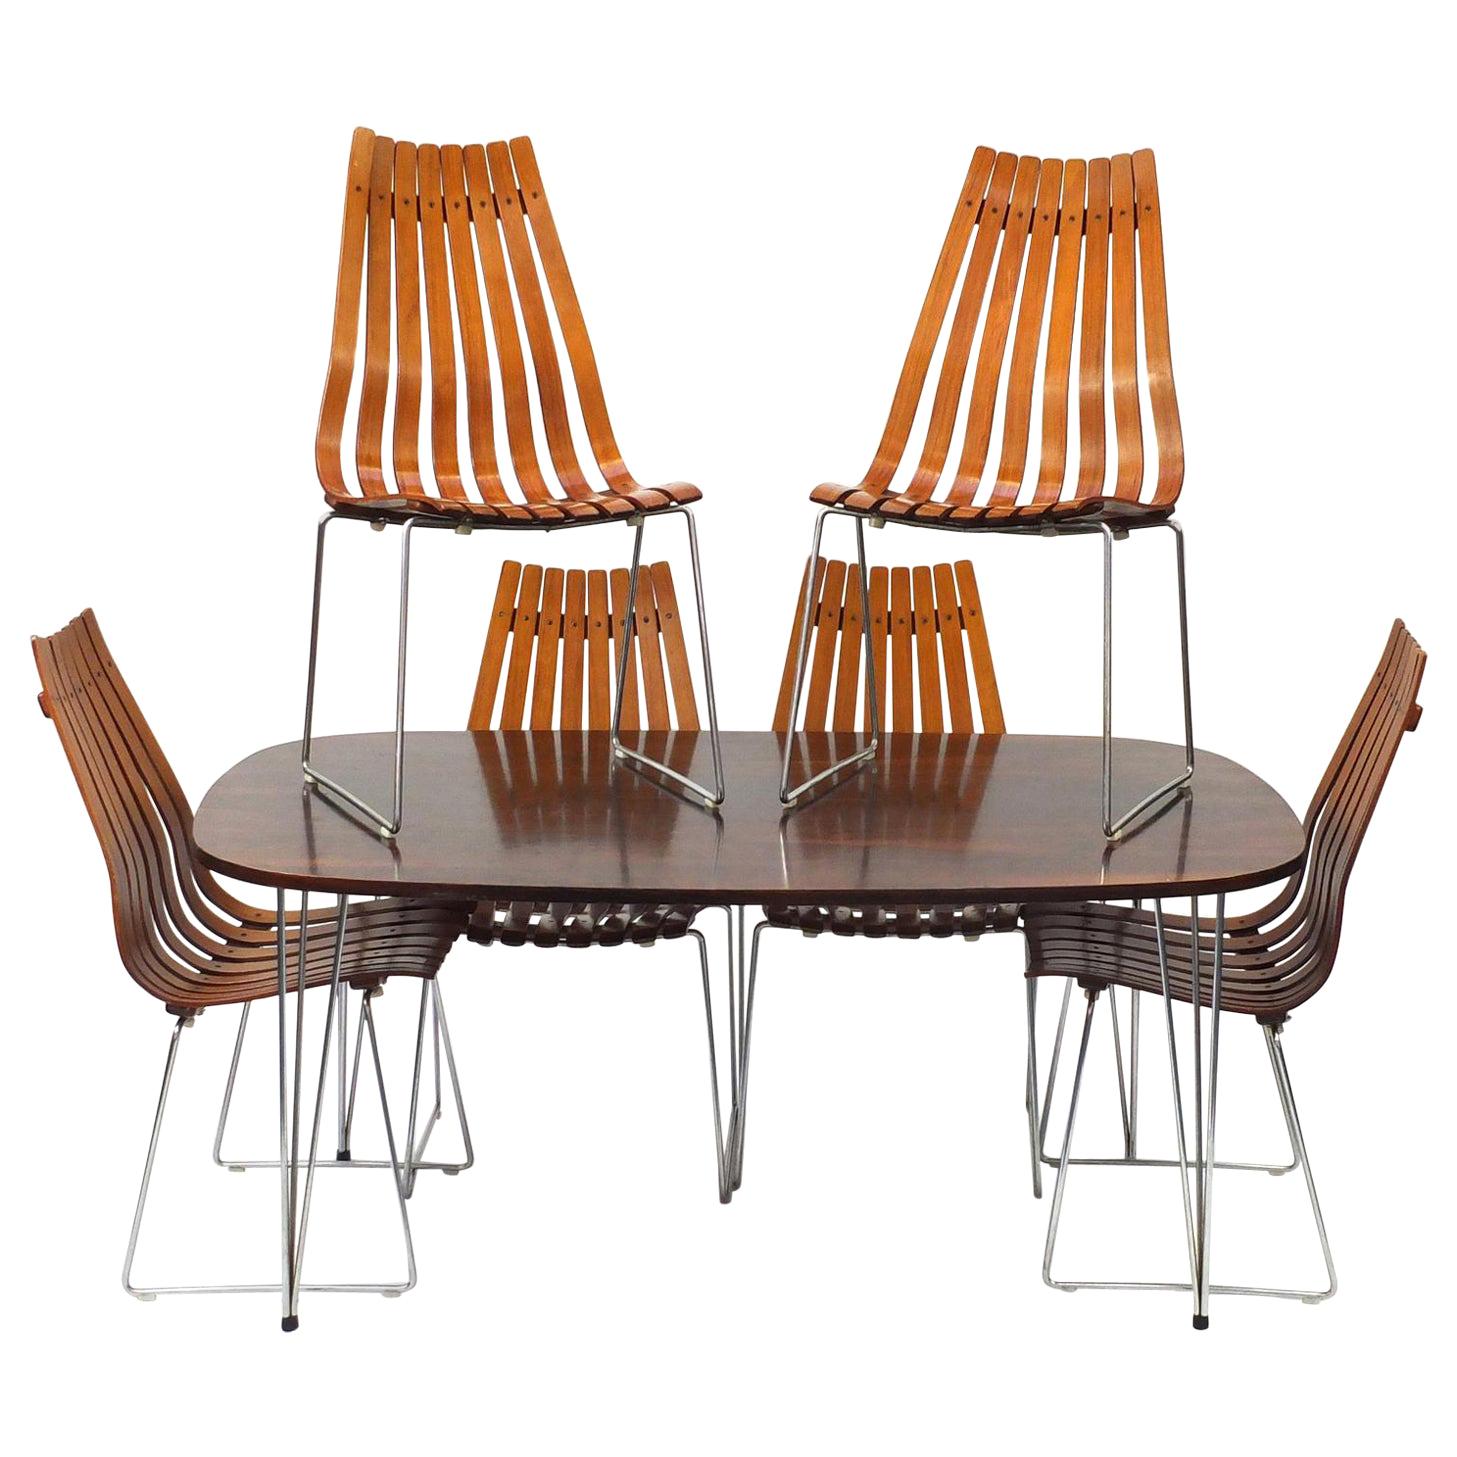 Hans Brattrud Rosewood Dining Table & Six Scandia Chairs, Hove Mobler circa 1965